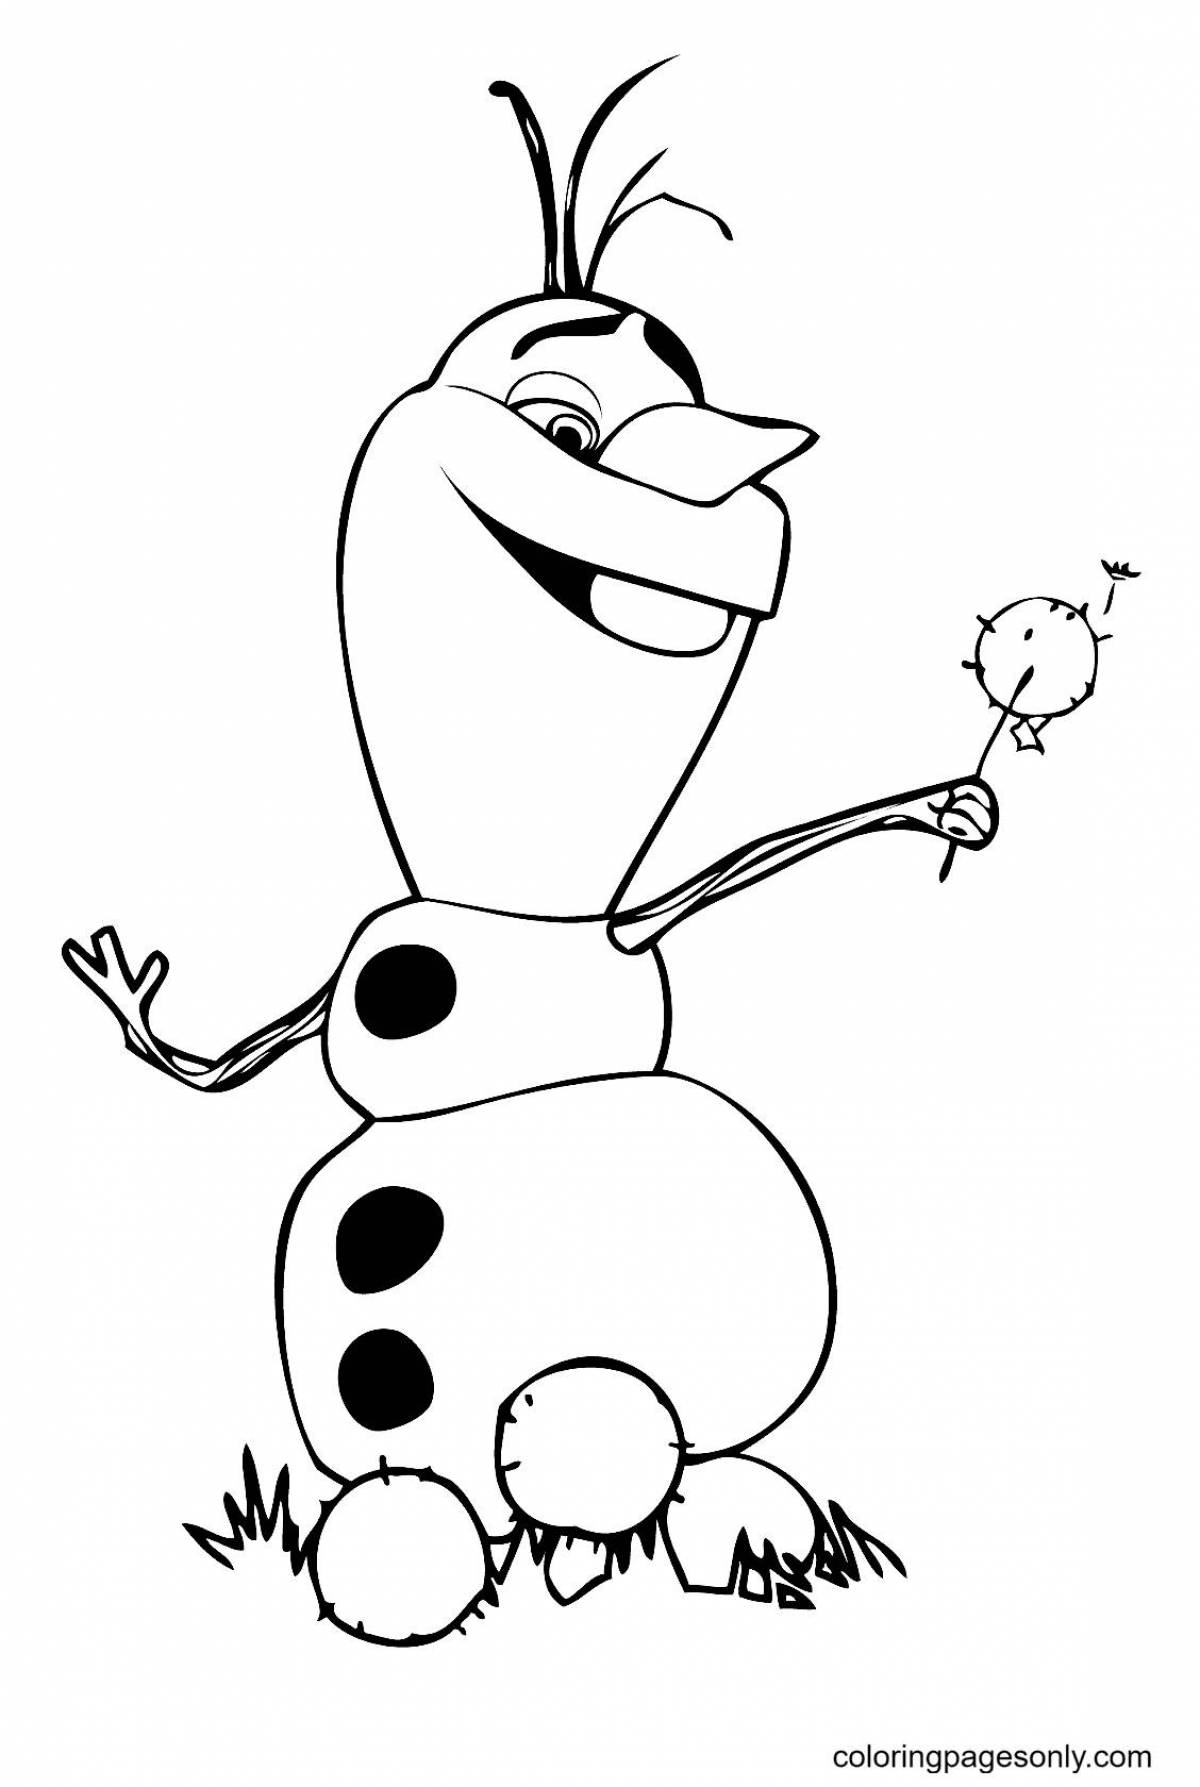 Olaf's nice coloring book